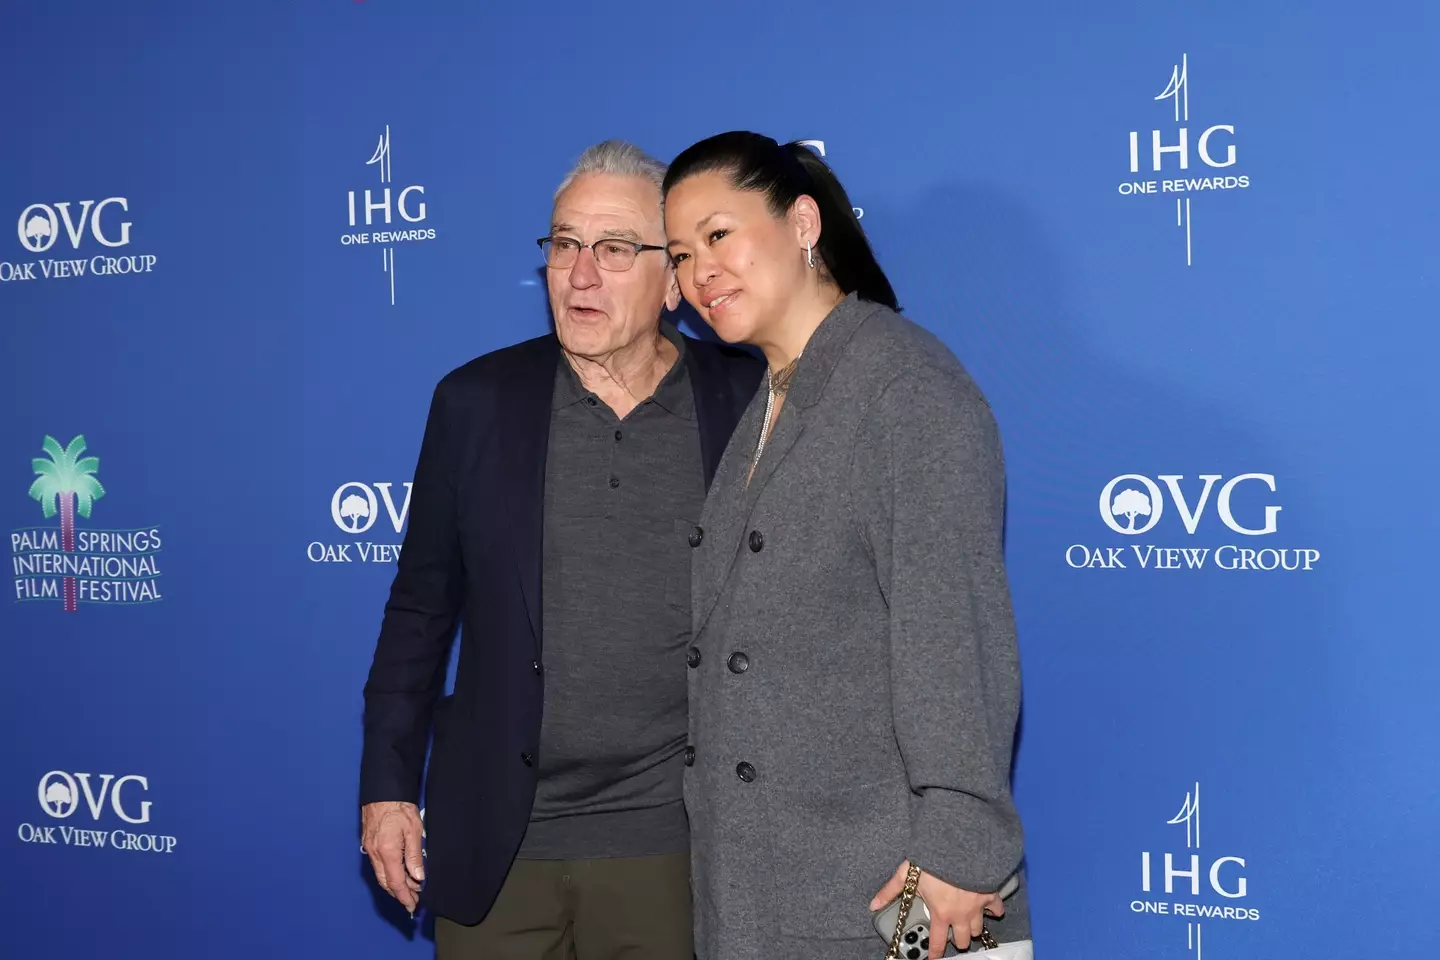 Gia is Robert De Niro's seventh child, and his first with partner Tiffany Chen.